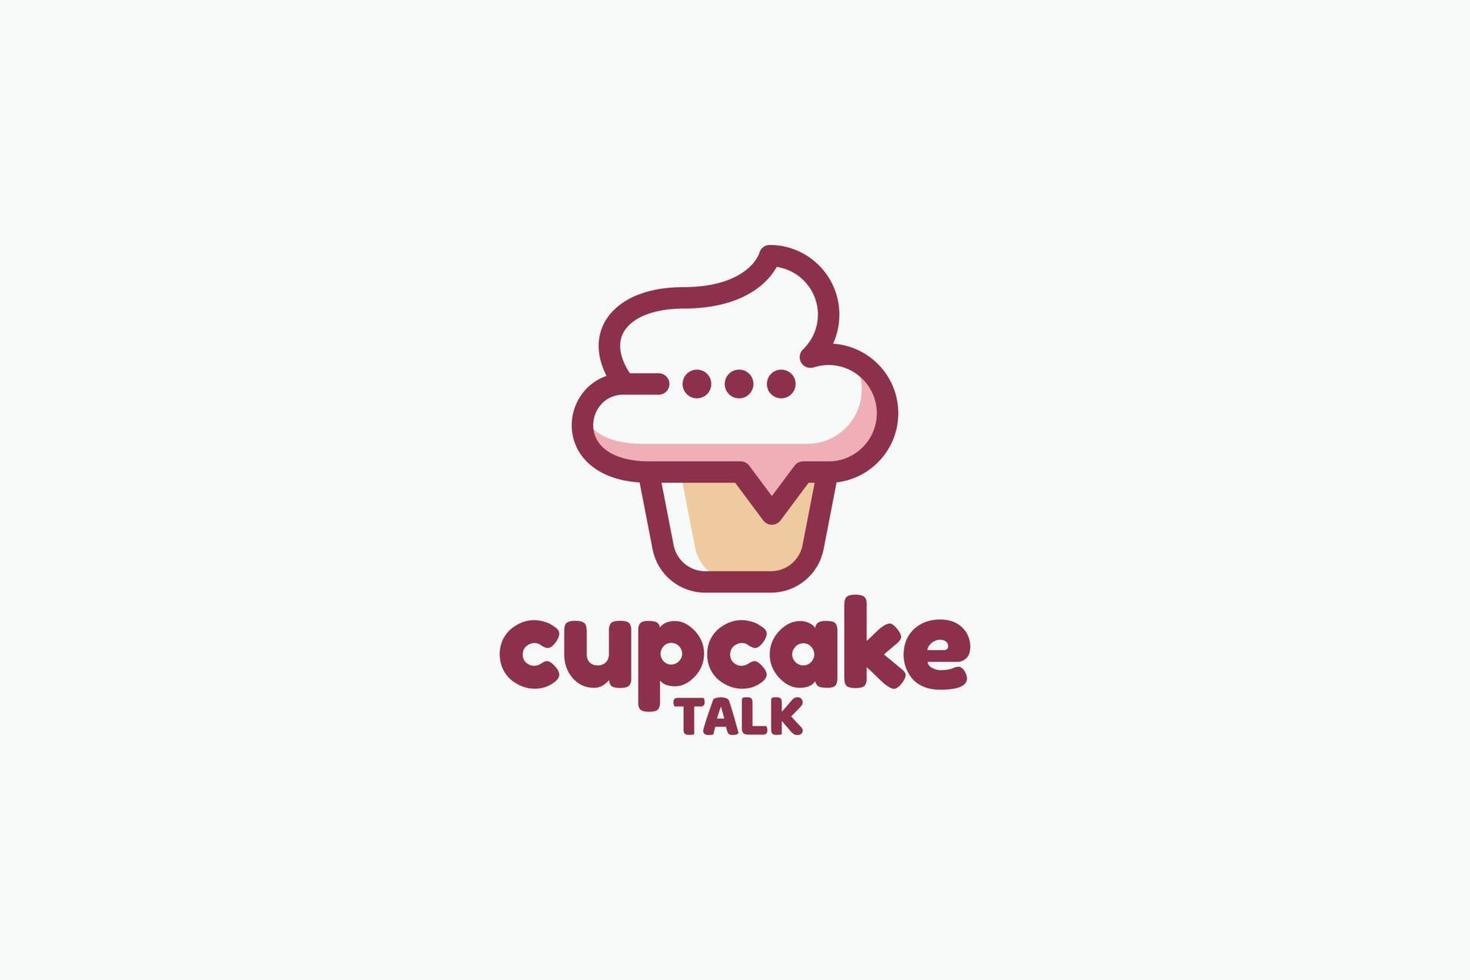 cupcake talk logo with a combination of a cute cupcake and chat or bubble as a topping on the cupcake. vector